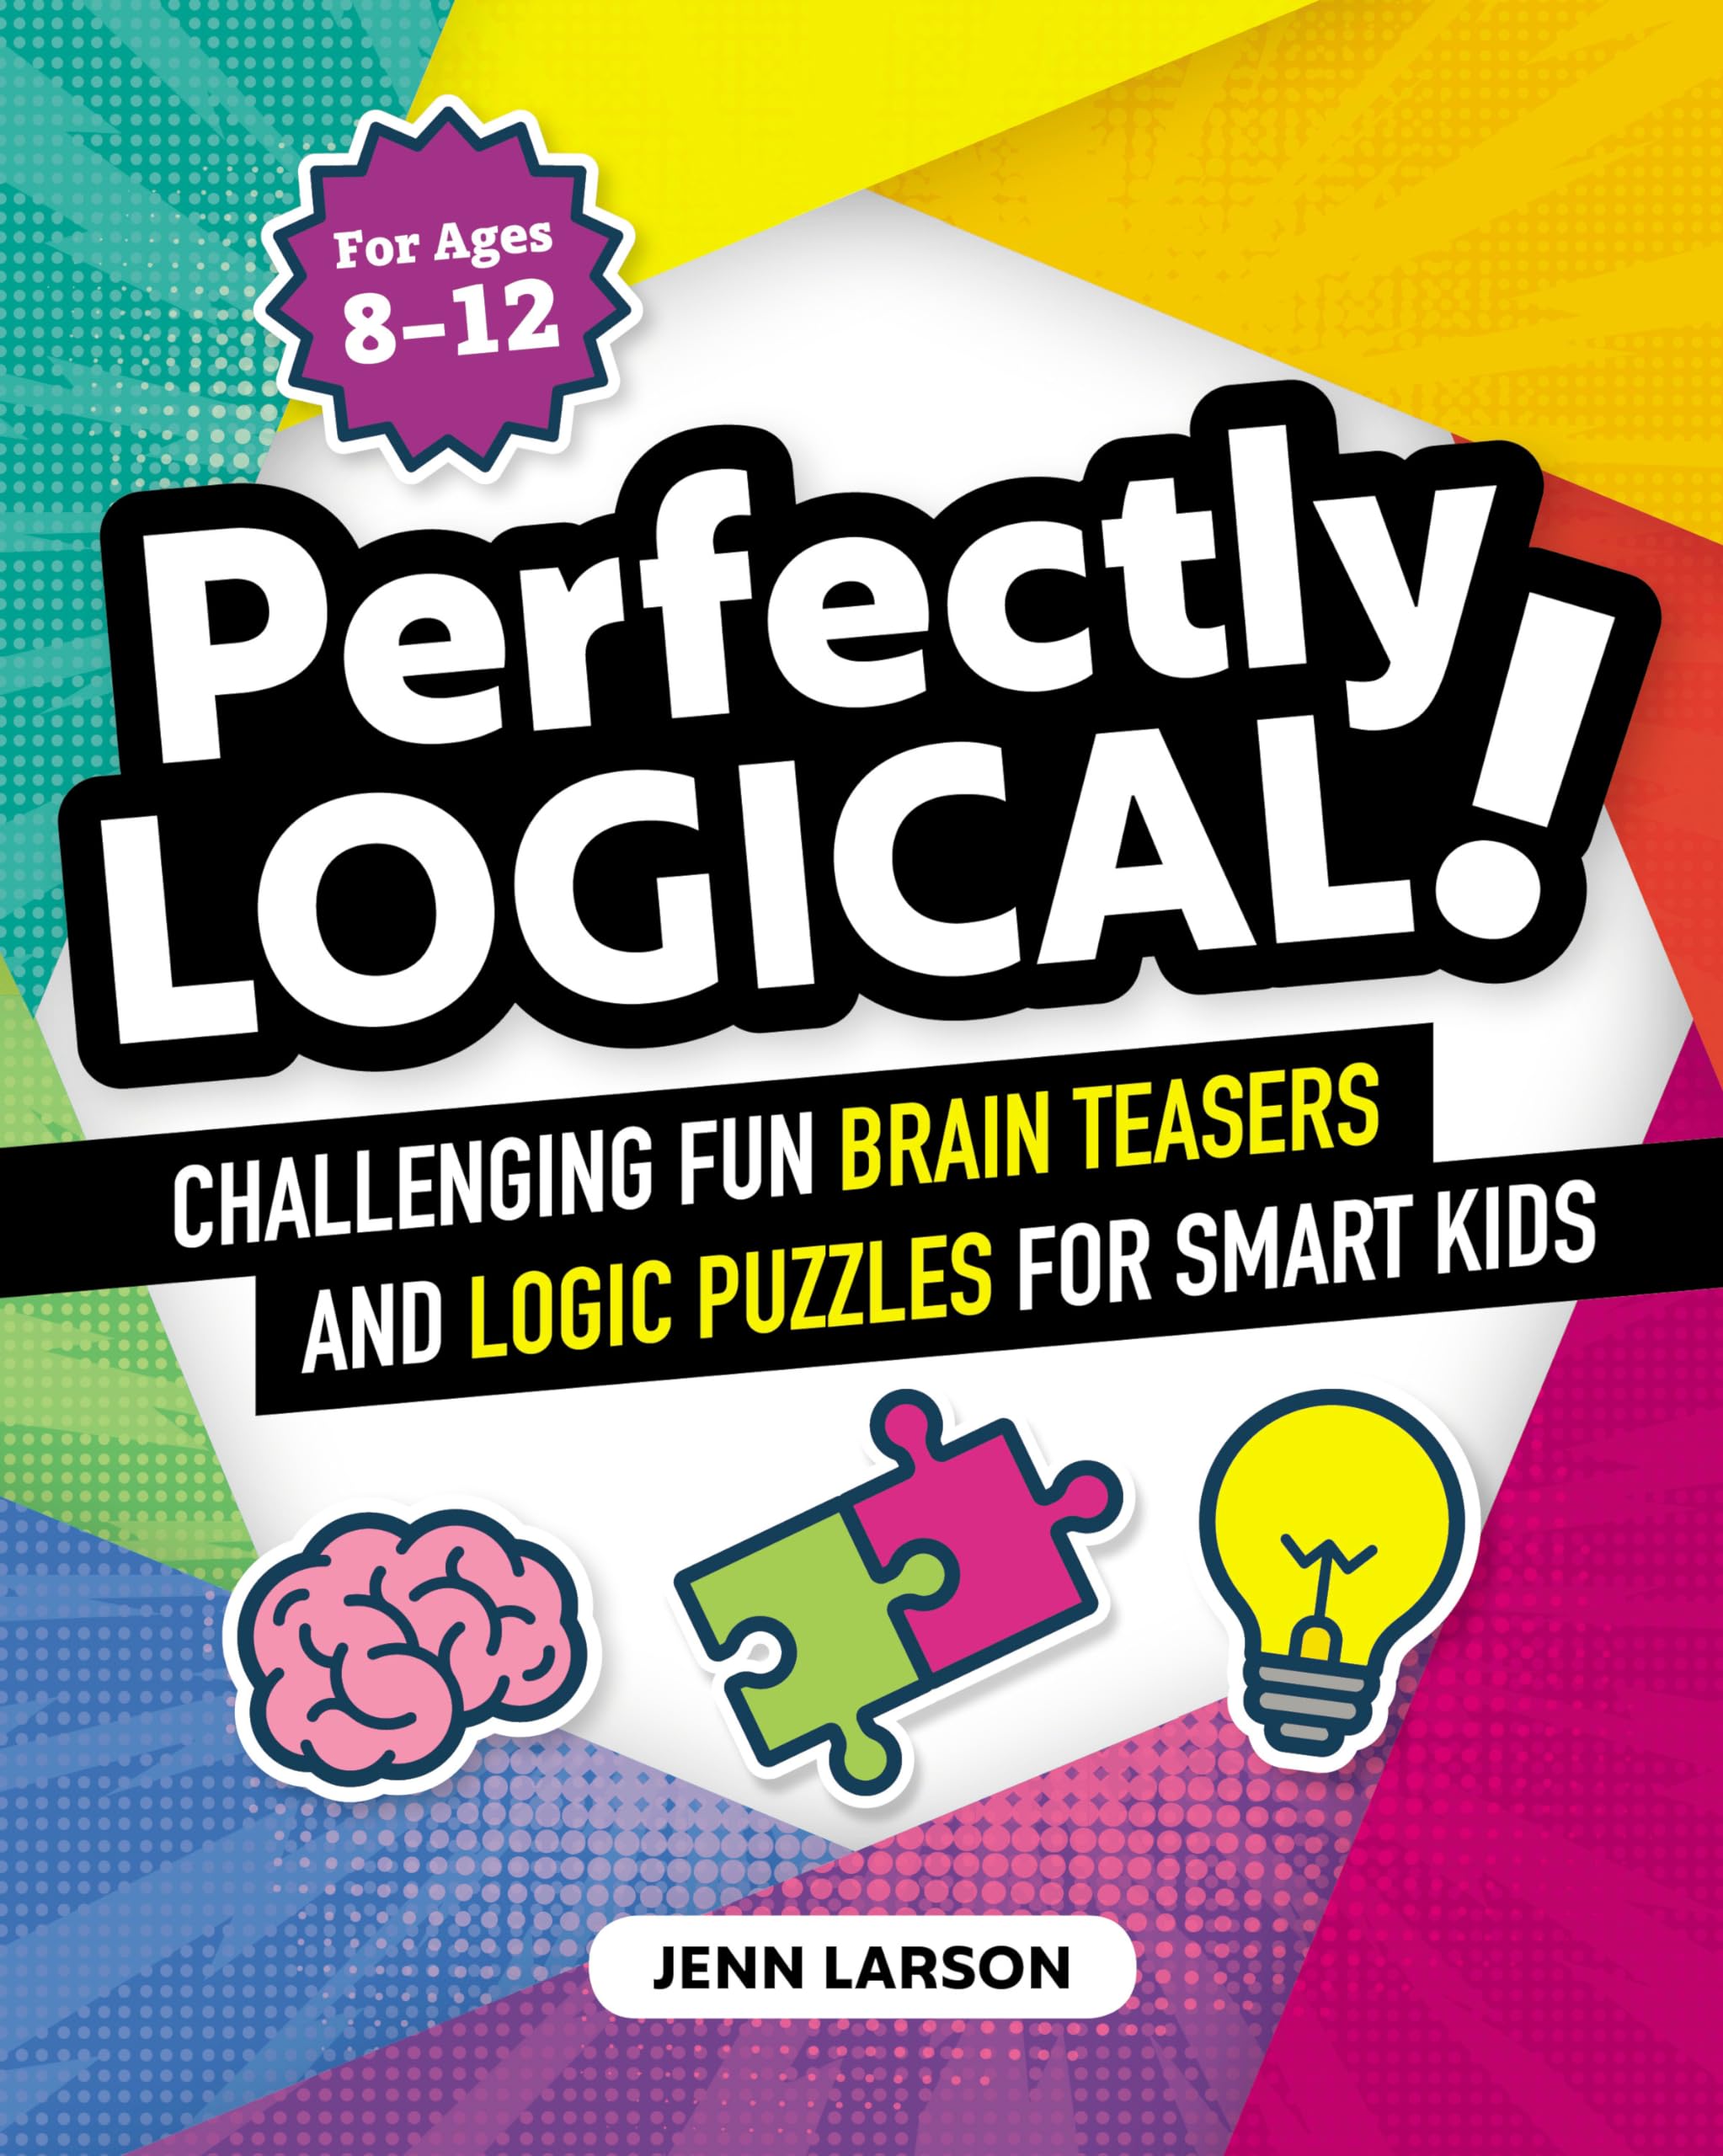 Perfectly Logical!: Challenging Fun Brain Teasers and Logic Puzzles for Smart Kids by Larson, Jenn